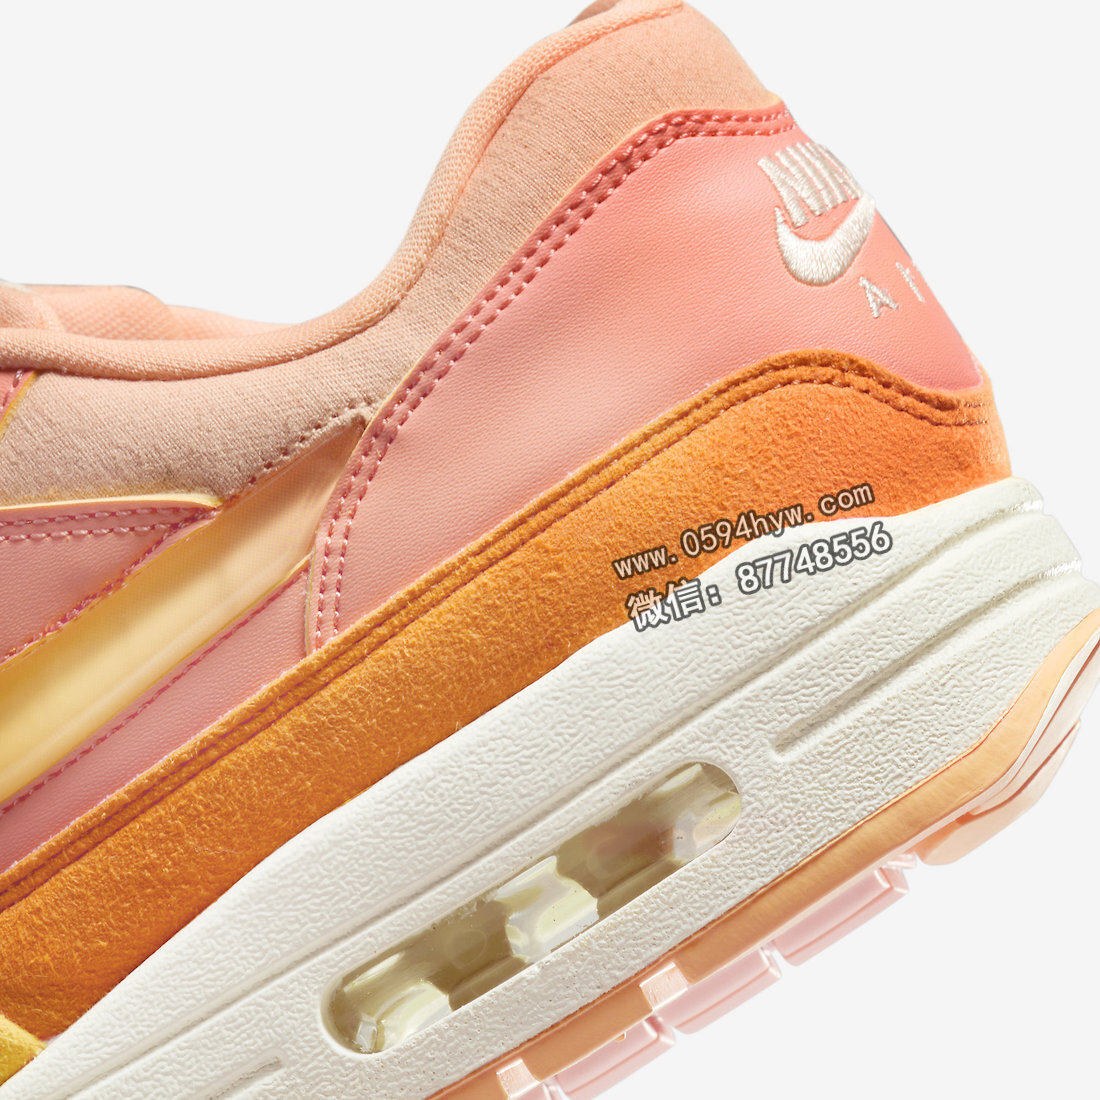 Nike-Air-Max-1-Puerto-Rico-Orange-Frost-FD6955-800-Release-Date-7